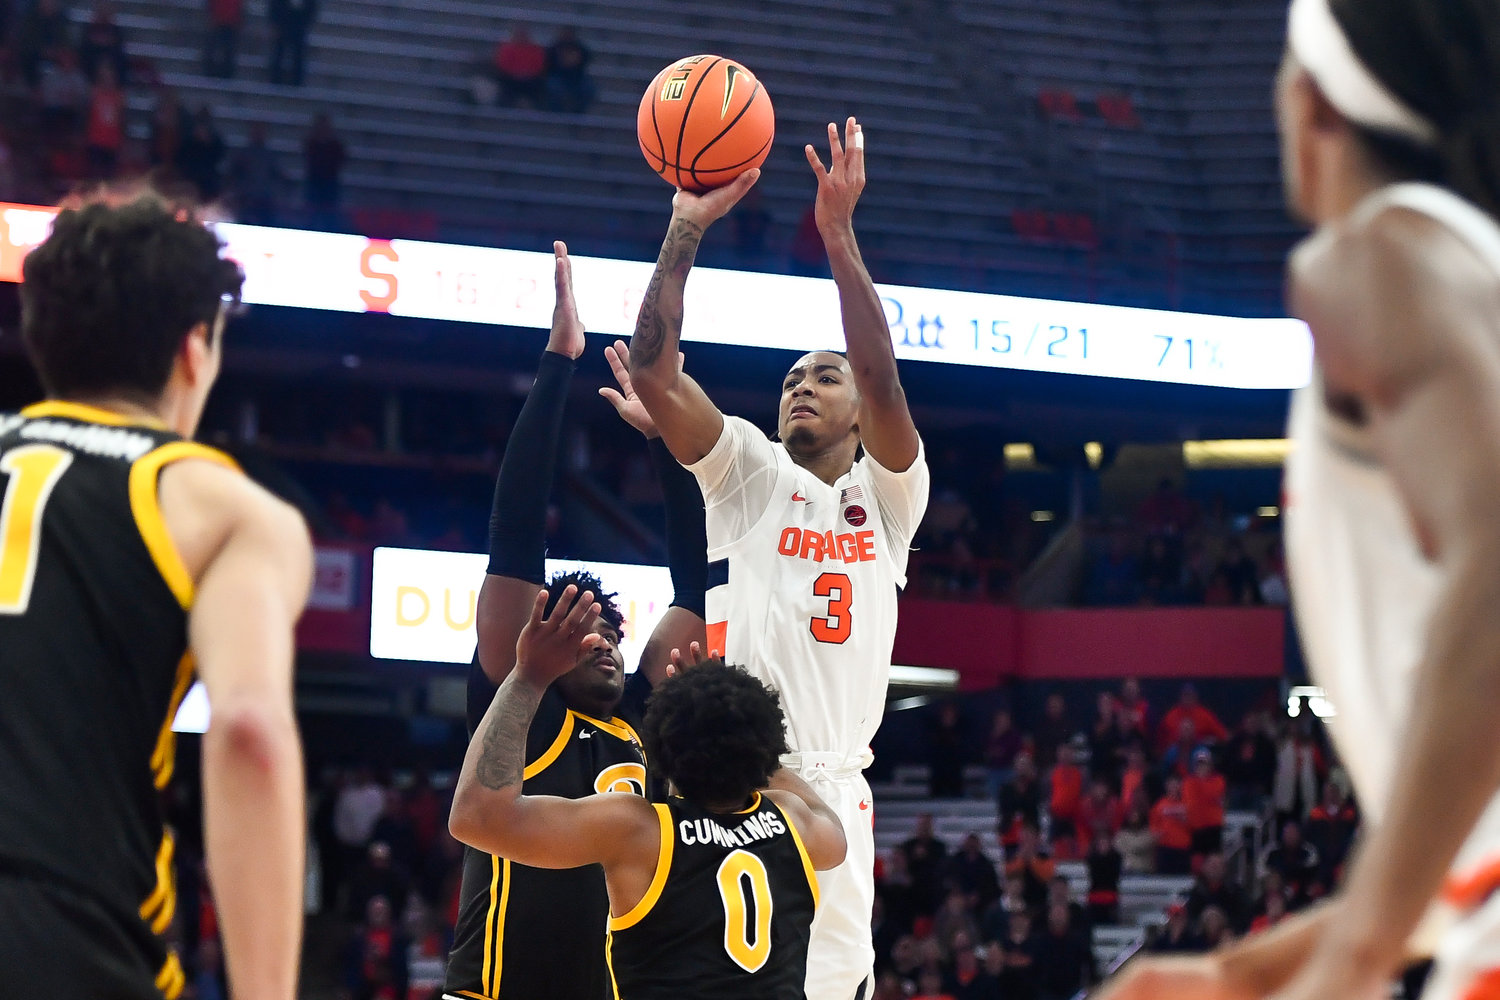 Syracuse guard Judah Mintz takes a shot over Pittsburgh guard Nelly Cummings (0) and forward Blake Hinson as time expired in the second half in Syracuse, Tuesday. Mintz missed and Pittsburgh won 84-82.